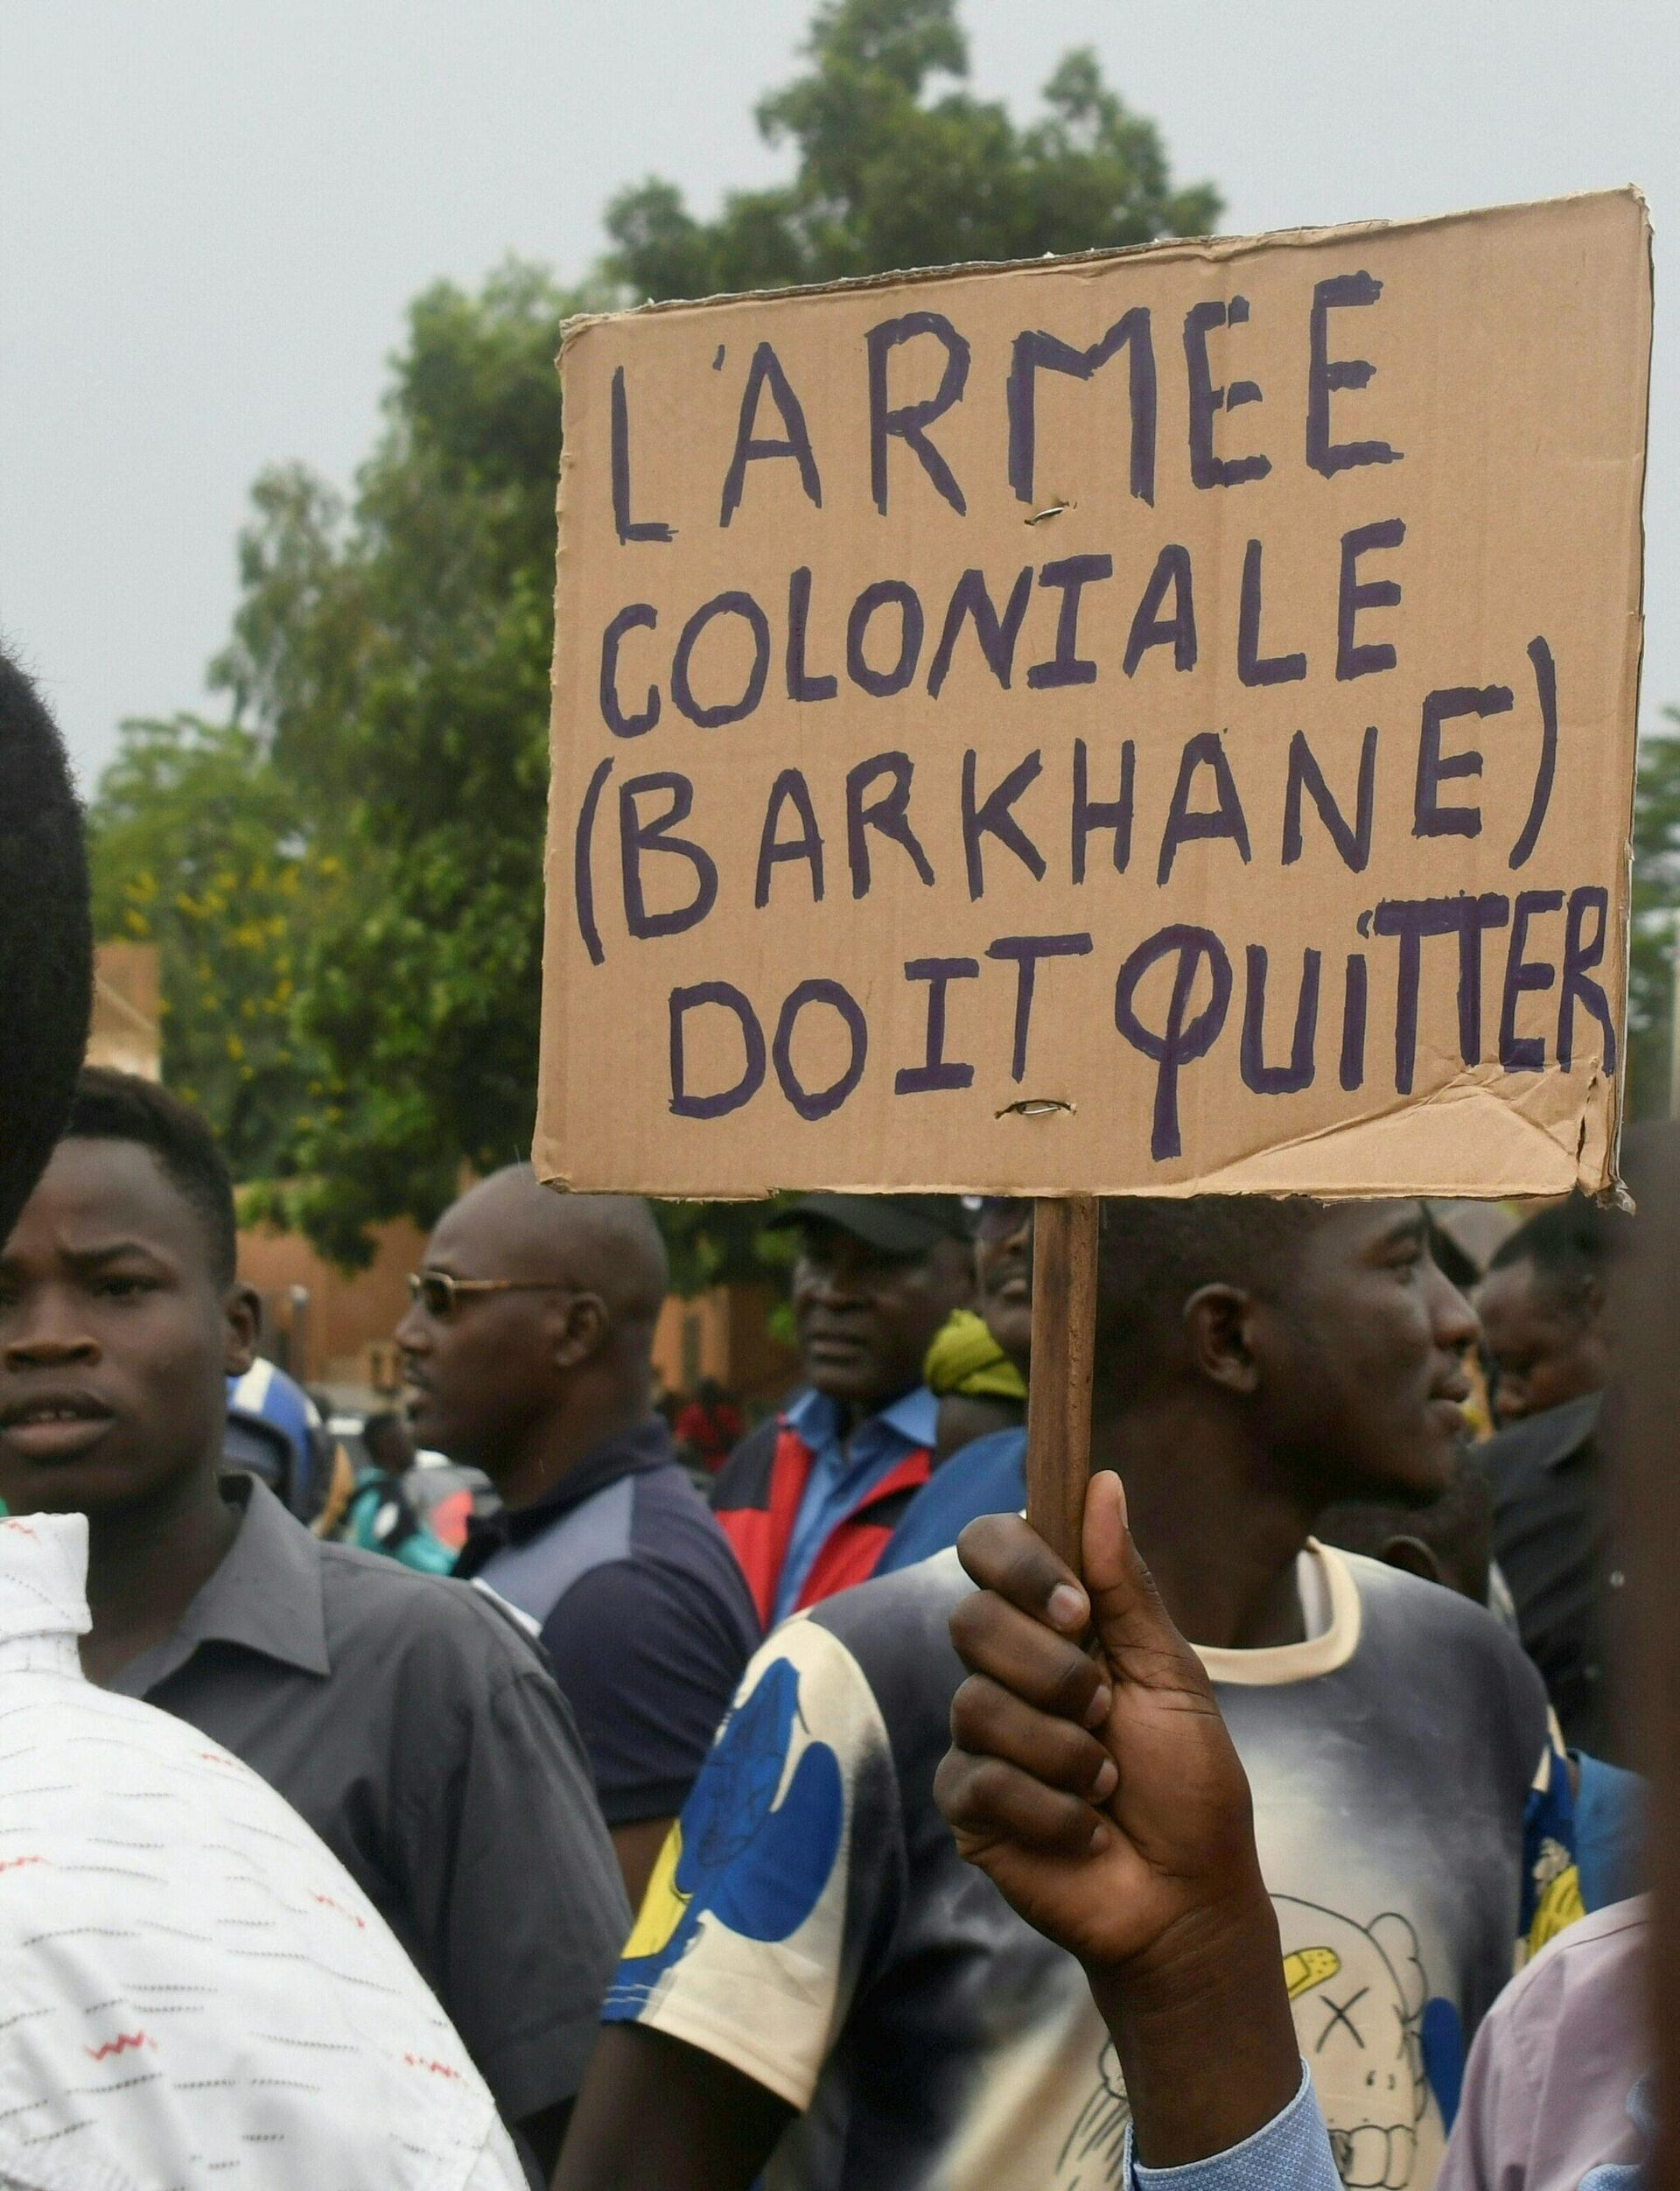 A man holds a placard reading The colonial army (Barkhane) must leave as people demonstrate against French military presence in Niger on September 18, 2022 in Niamey. - French forces first intervened in the Sahel's jihadist emergency in 2013, sending troops to support Malian forces fighting a regional insurgency.
It widened the effort a year later with Operation Barkhane, eventually deploying some 5,100 troops, warplanes and drones in former colonies Chad, Burkina Faso, Mali, Mauritania and Niger. (Photo by Boureima HAMA / AFP) - Sputnik International, 1920, 20.09.2022